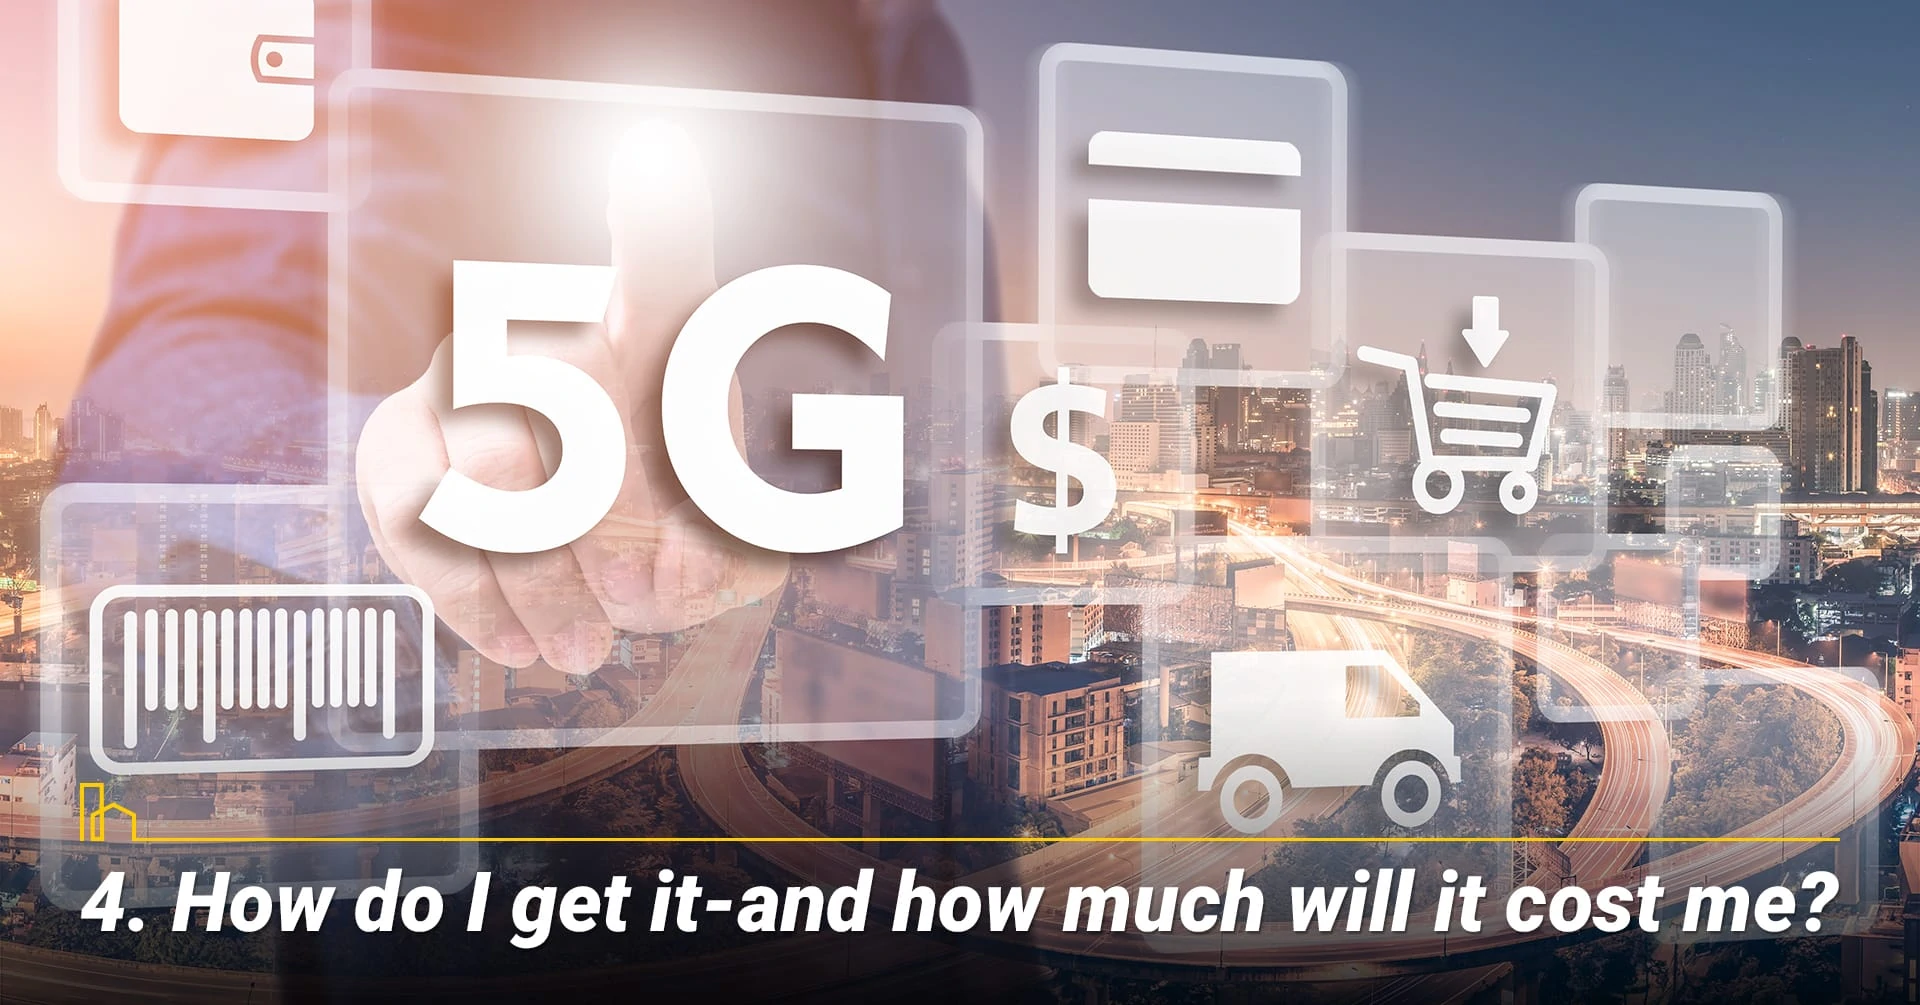 How do I get it—and how much will it cost me? Cost of 5G